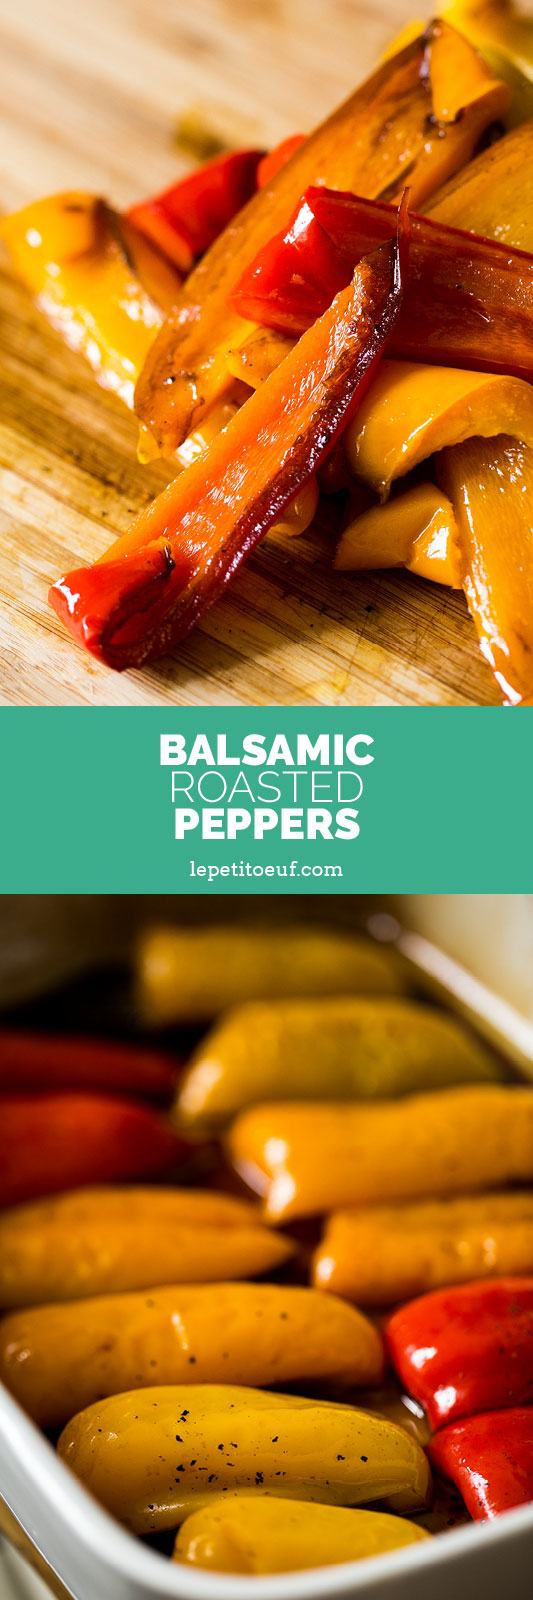 Balsamic roasted peppers are a mediterranean treat made with red, orange, green or yellow peppers, gently braised in the oven with garlic, balsamic vinegar and extra virgin olive oil until they become soft, sweet, richly flavoured slithers of pepper. Perfect for a salad, a picnic or to be served alongside cheese, charcuterie and olives as antipasti. Alternatively make ahead and store them in the fridge until you need them.